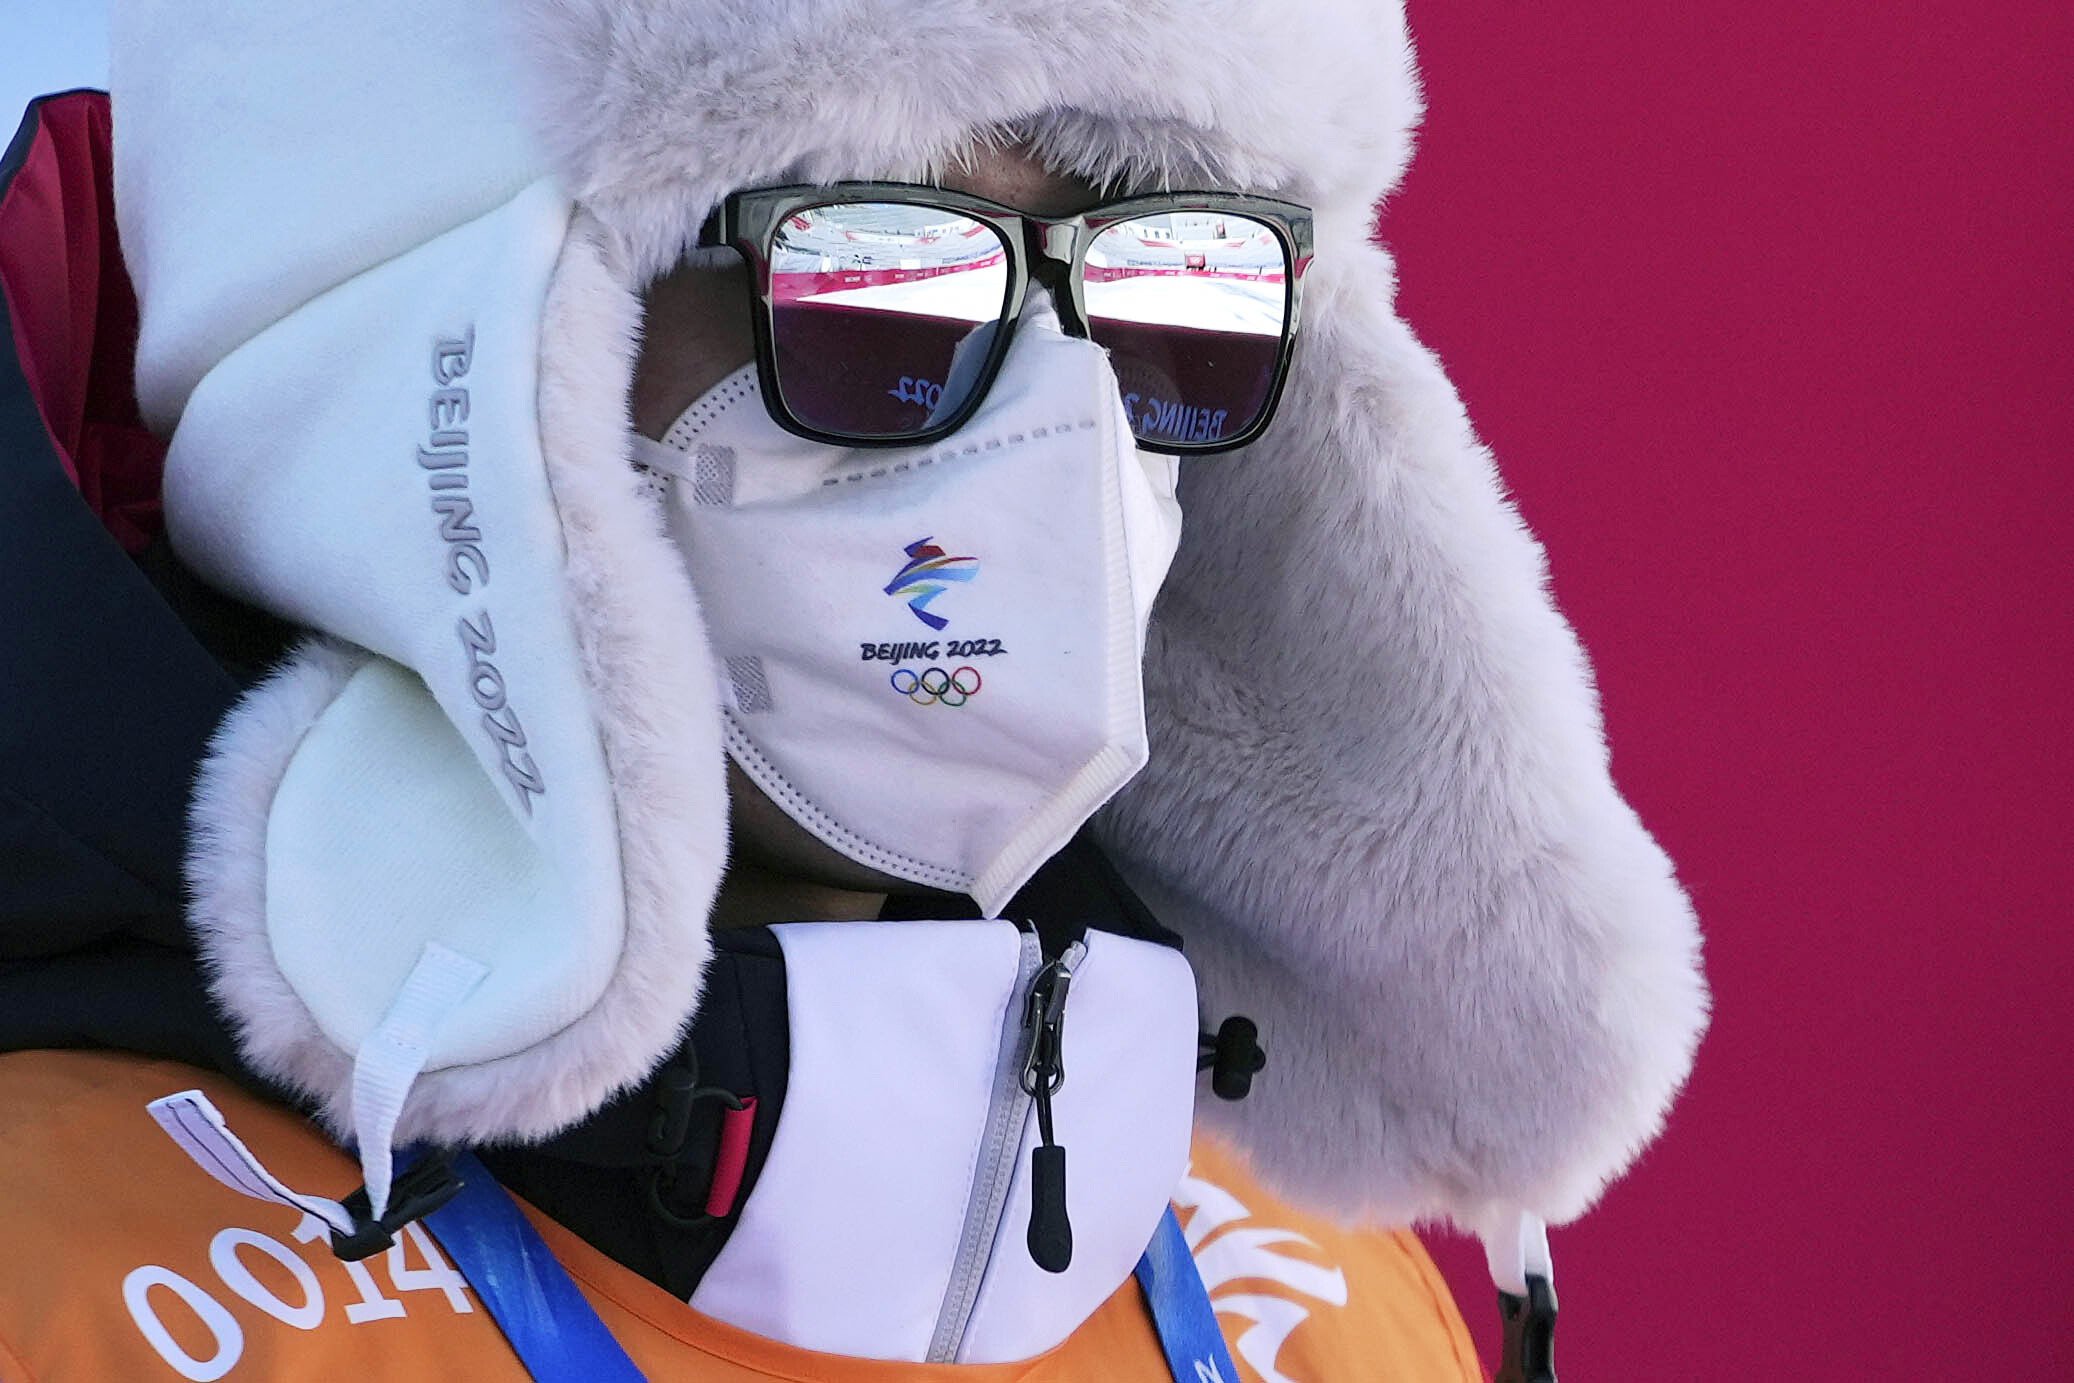  A man wears a face mask displaying the Olympic rings at the ski jumping stadium ahead of the 2022 Winter Olympics, Tuesday, Feb. 1, 2022, in Zhangjiakou, China. (AP Photo/Matthias Schrader) 